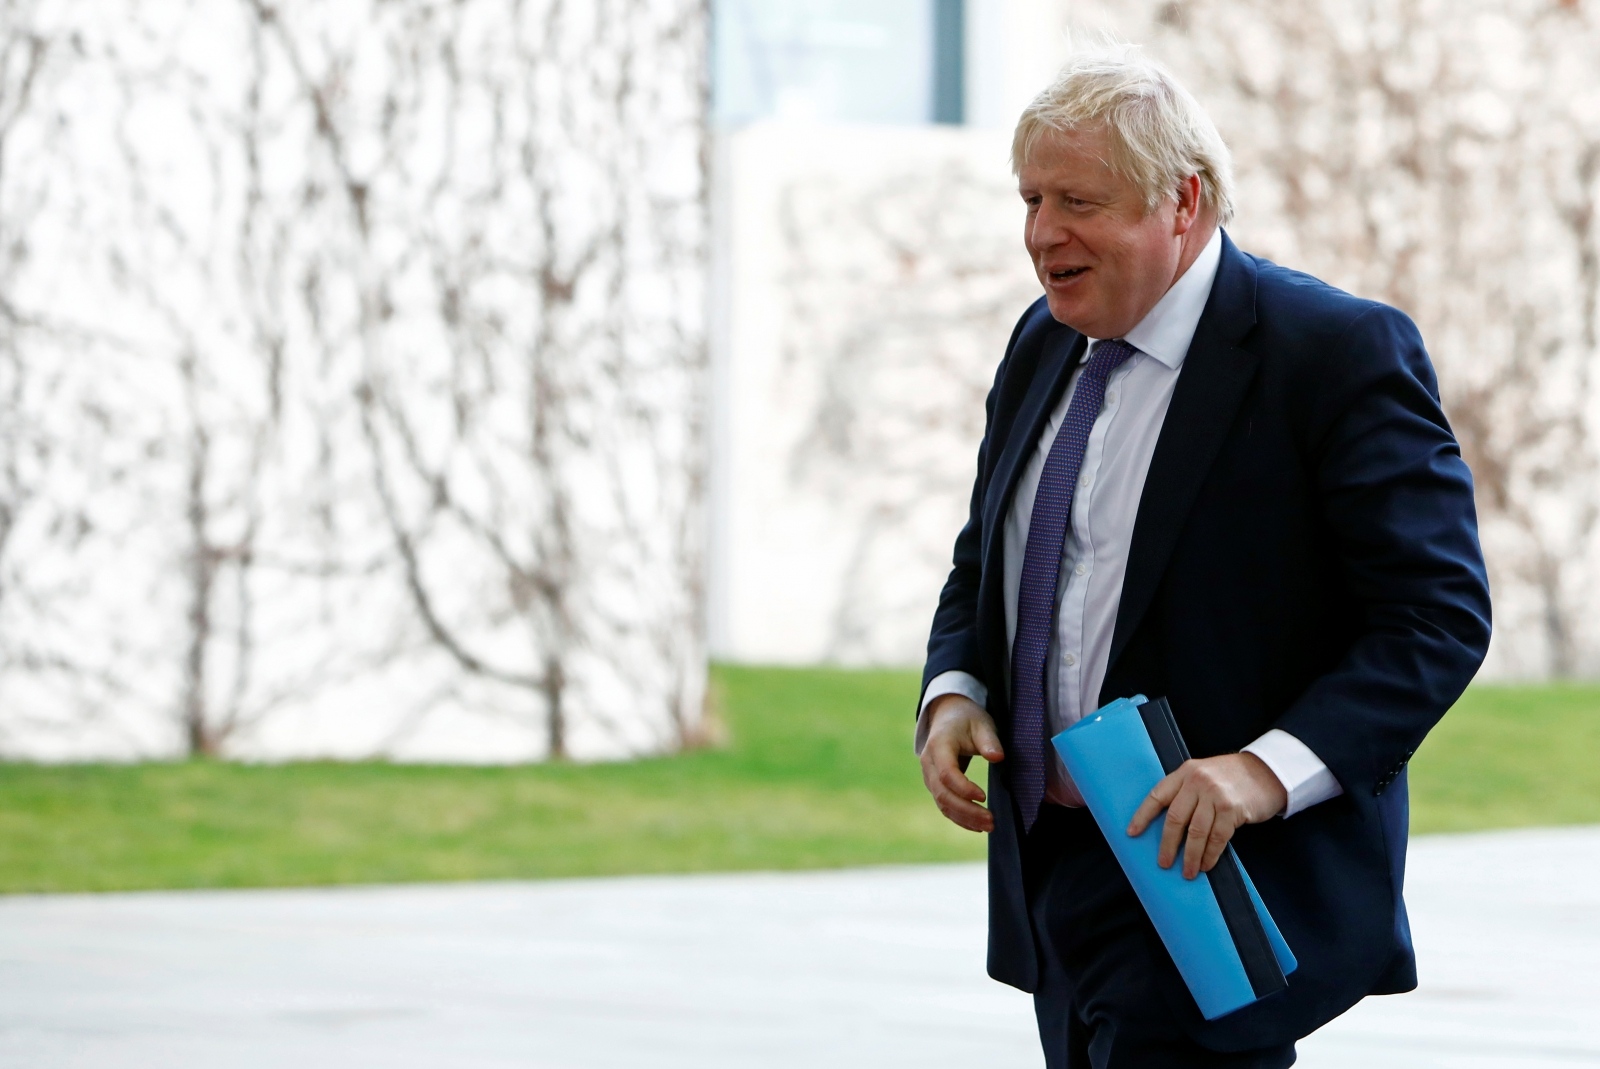 Britain's Prime Minister Boris Johnson arrives at the Libya summit in Berlin Britain's Prime Minister Boris Johnson arrives at the Libya summit in Berlin, Germany, January 19, 2020.  REUTERS/Michele Tantussi MICHELE TANTUSSI